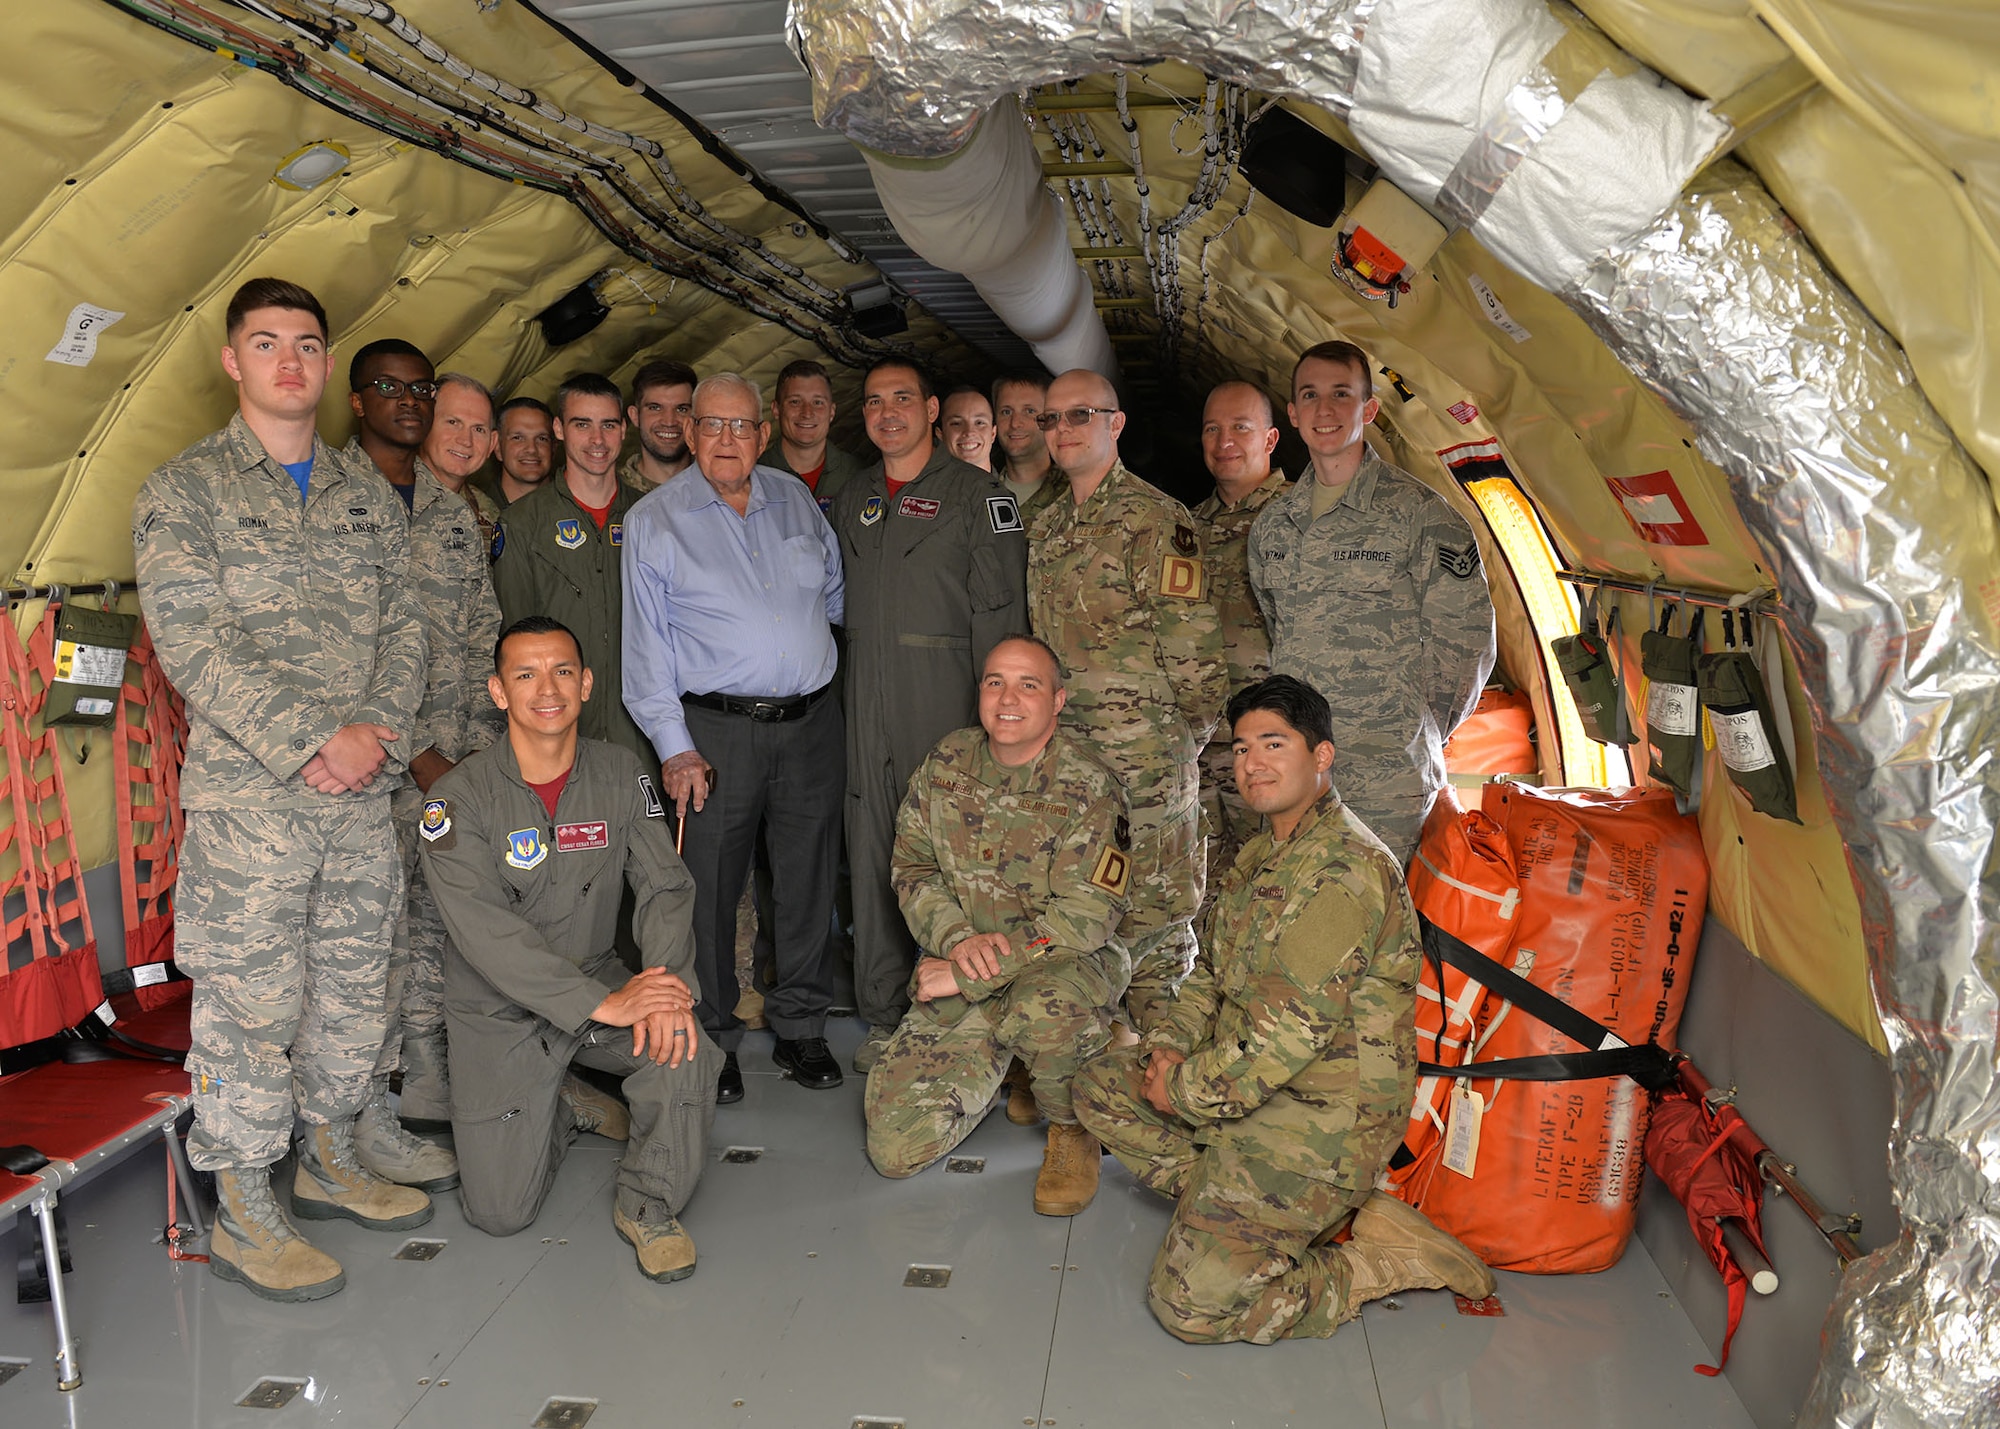 U.S. Air Force Airmen from the 100th Operations Group and 100th Maintenance Group pose for a photo with retired Master Sgt. Dewey Christopher, a former 351st Bomb Squadron crew chief, 100th Bomb Group and World War II veteran, when he visited RAF Mildenhall, England, June 21, 2019. The Professional Development Center was renamed the “Dewey R. Christopher Professional Development Center” to honor the legacy of the veteran, who was guest of honor at the event. (U.S. Air Force photo by Karen Abeyasekere)